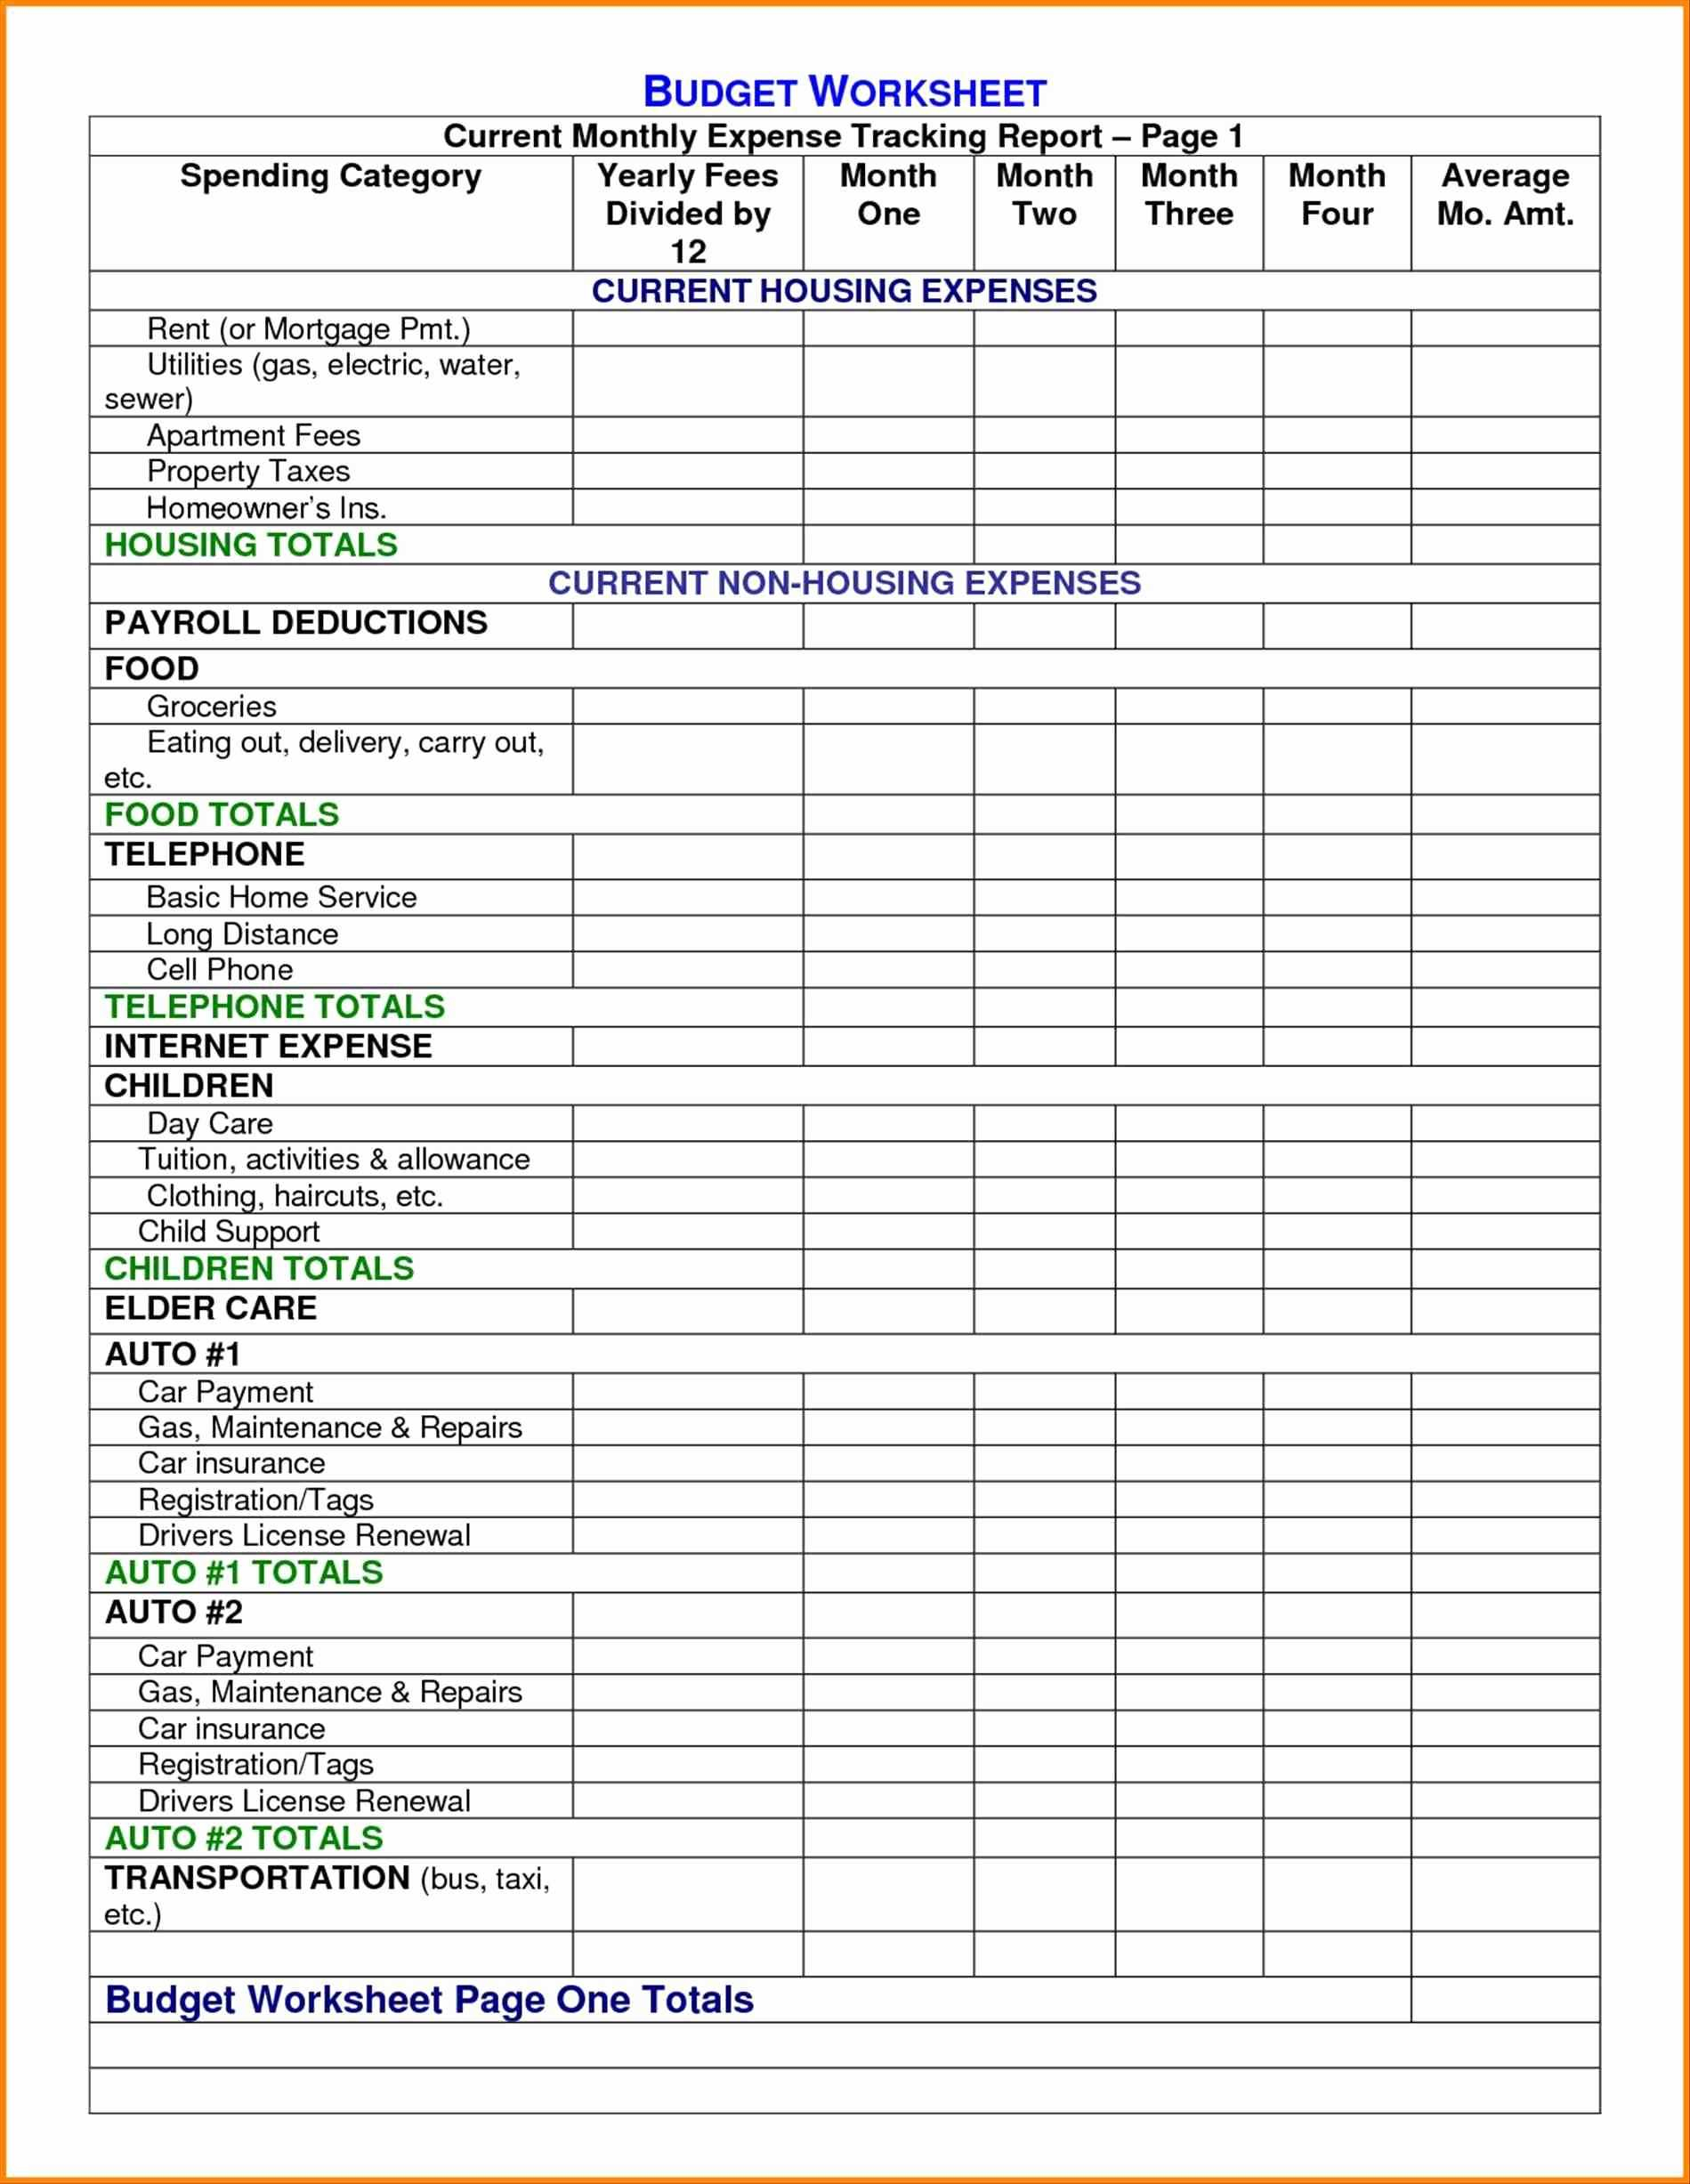 Words Their Way Spelling Inventory Excel Spreadsheet Throughout Inventory Tracking Spreadsheet Excel And Control Template Invoice